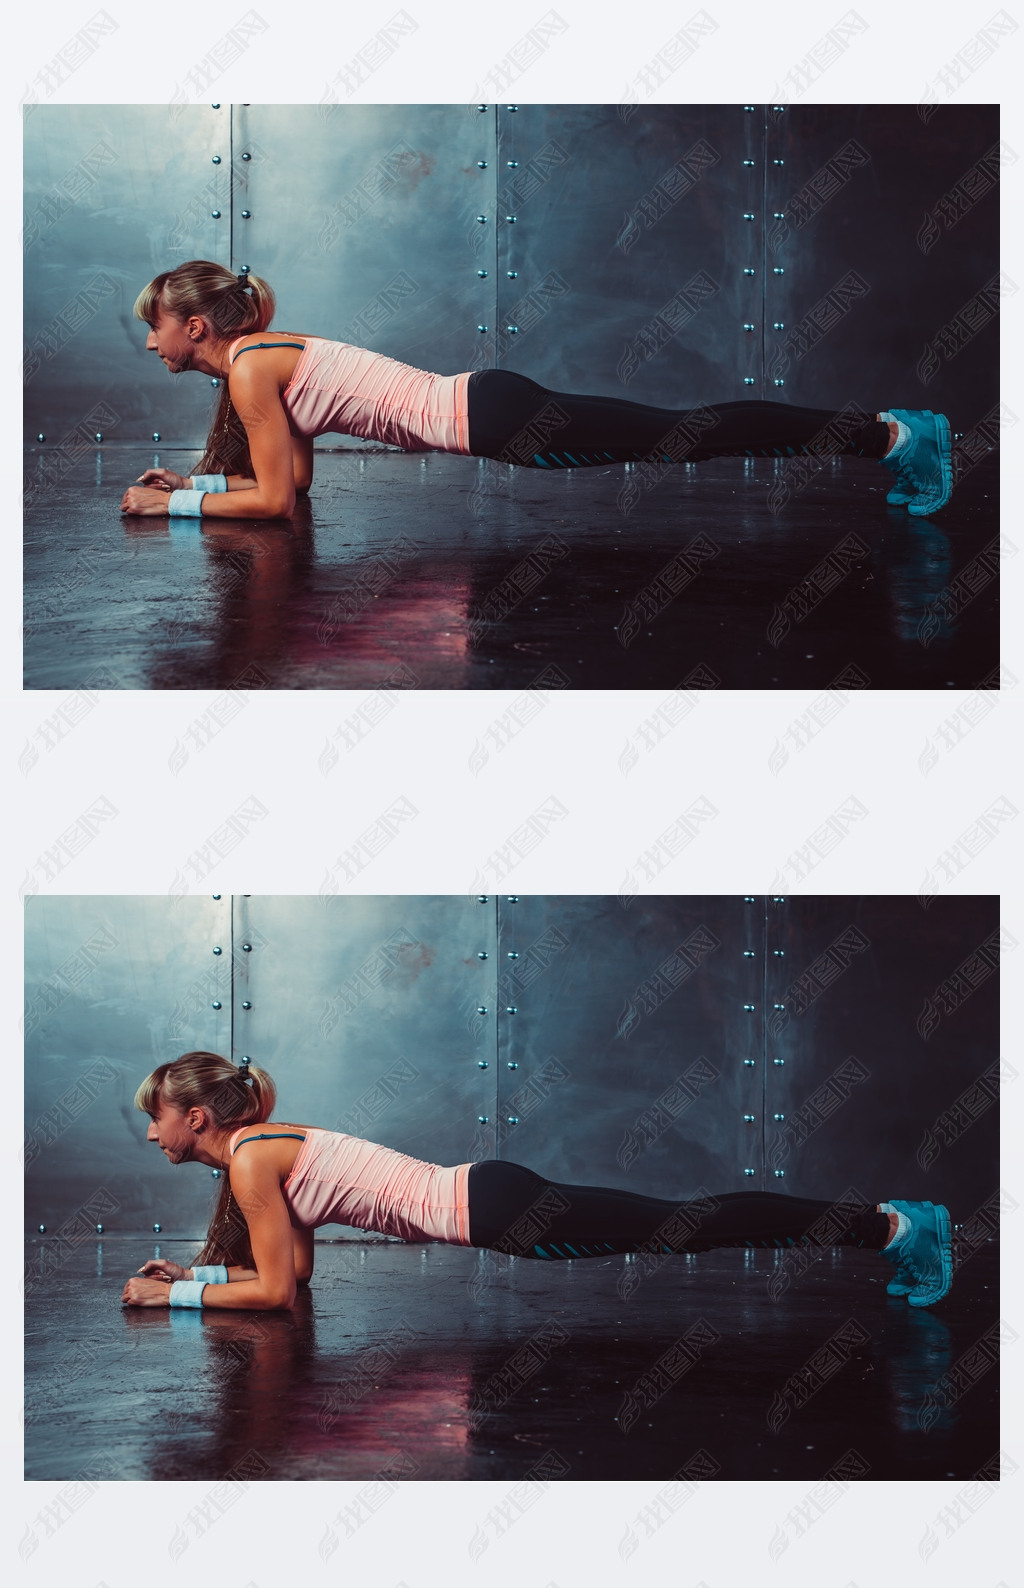 Slim fitness young woman Athlete girl doing plank exercise concept training workout crossfit gymnast